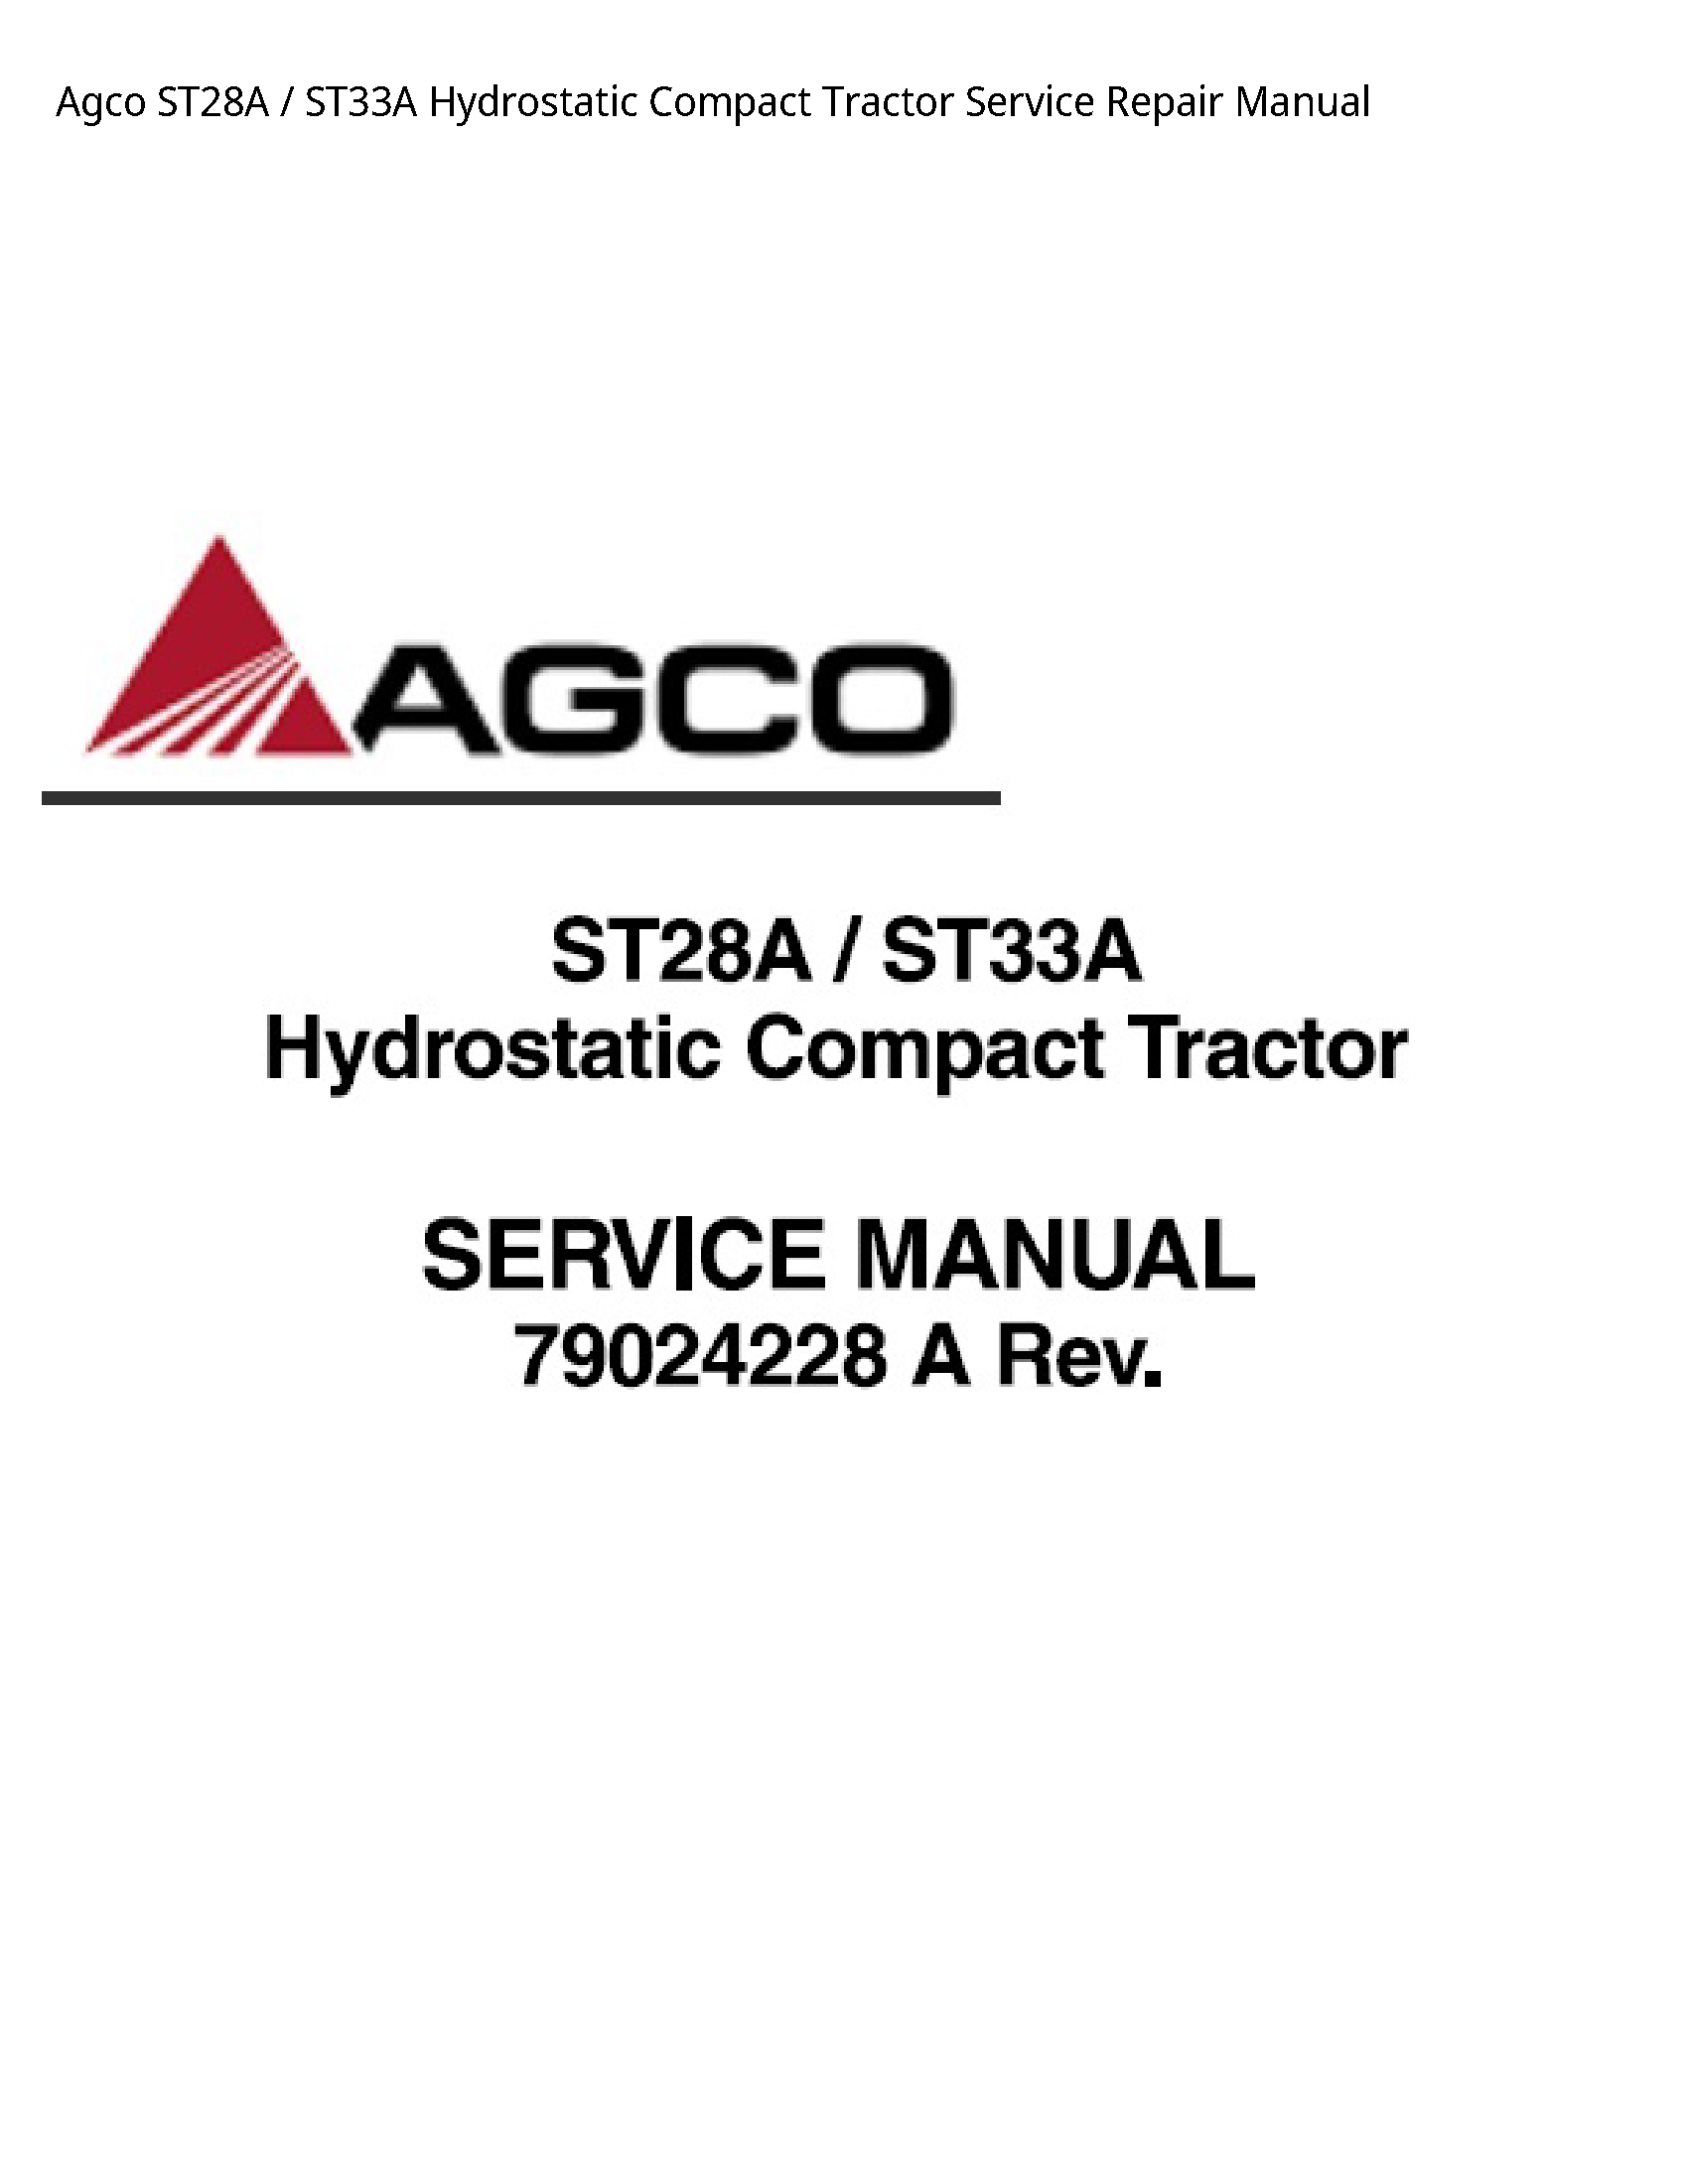 AGCO ST28A Hydrostatic Compact Tractor manual